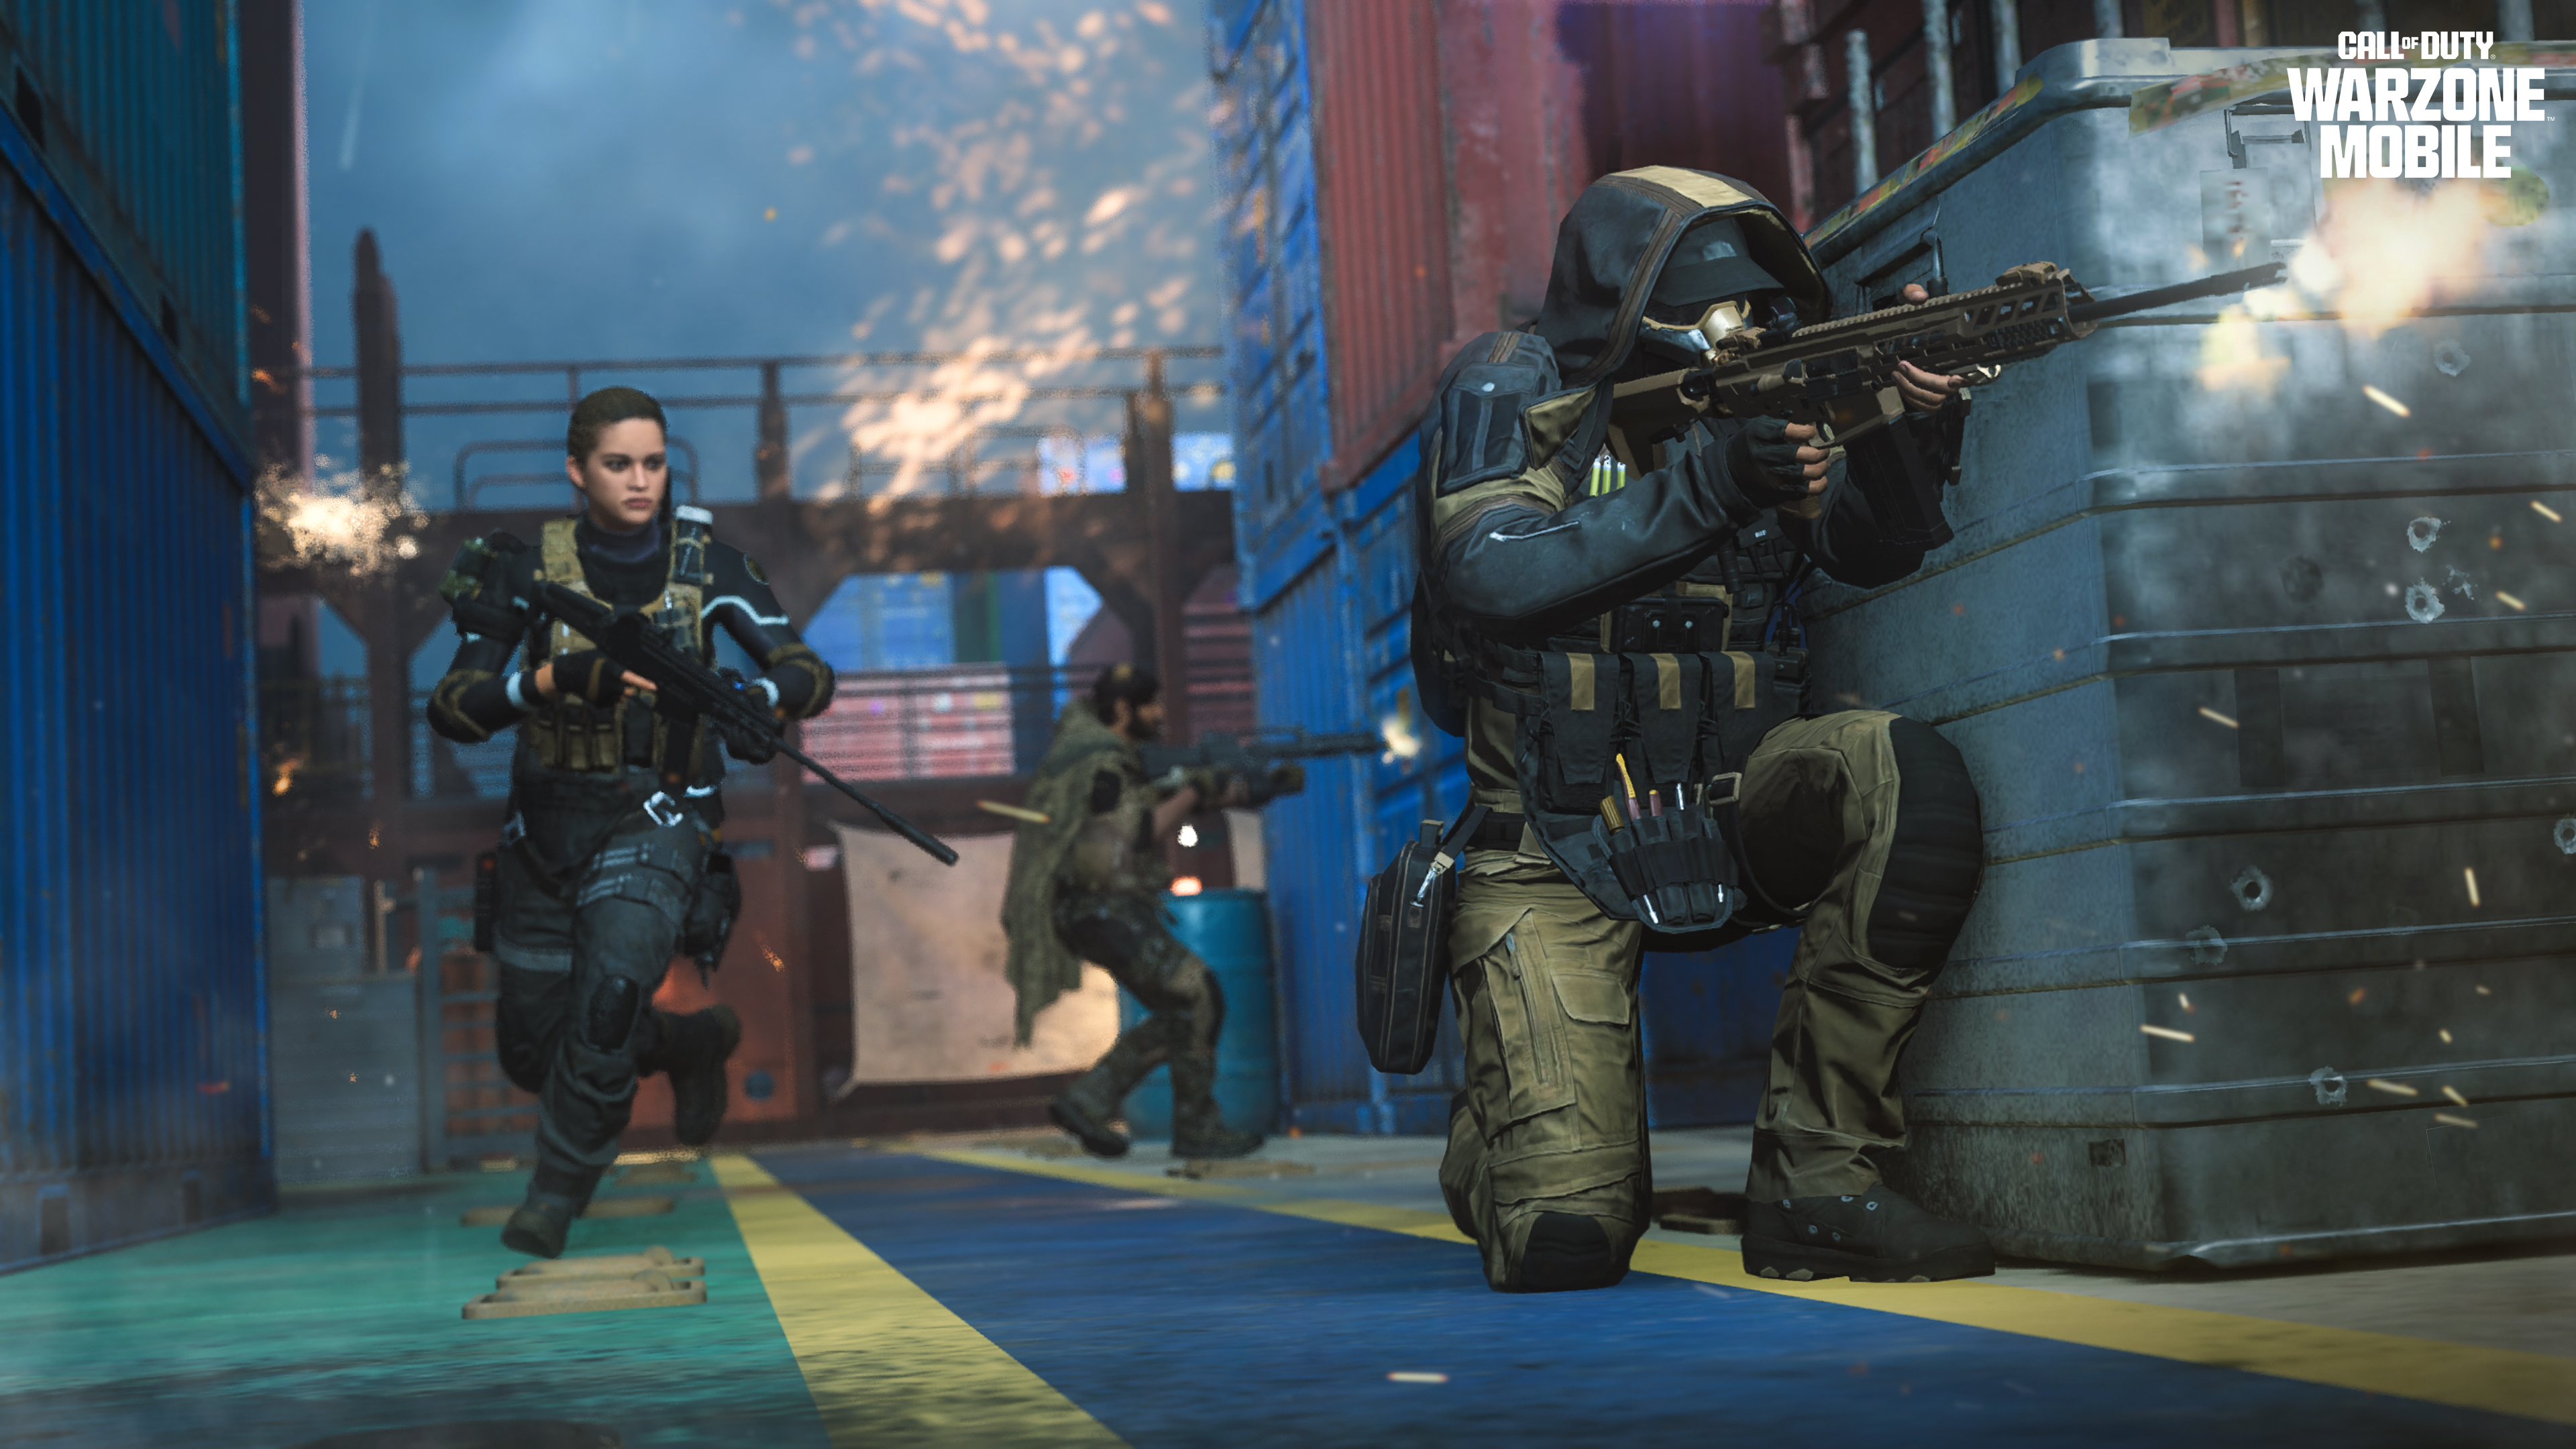 A squad shoots guns in Call of Duty Warzone Mobile.